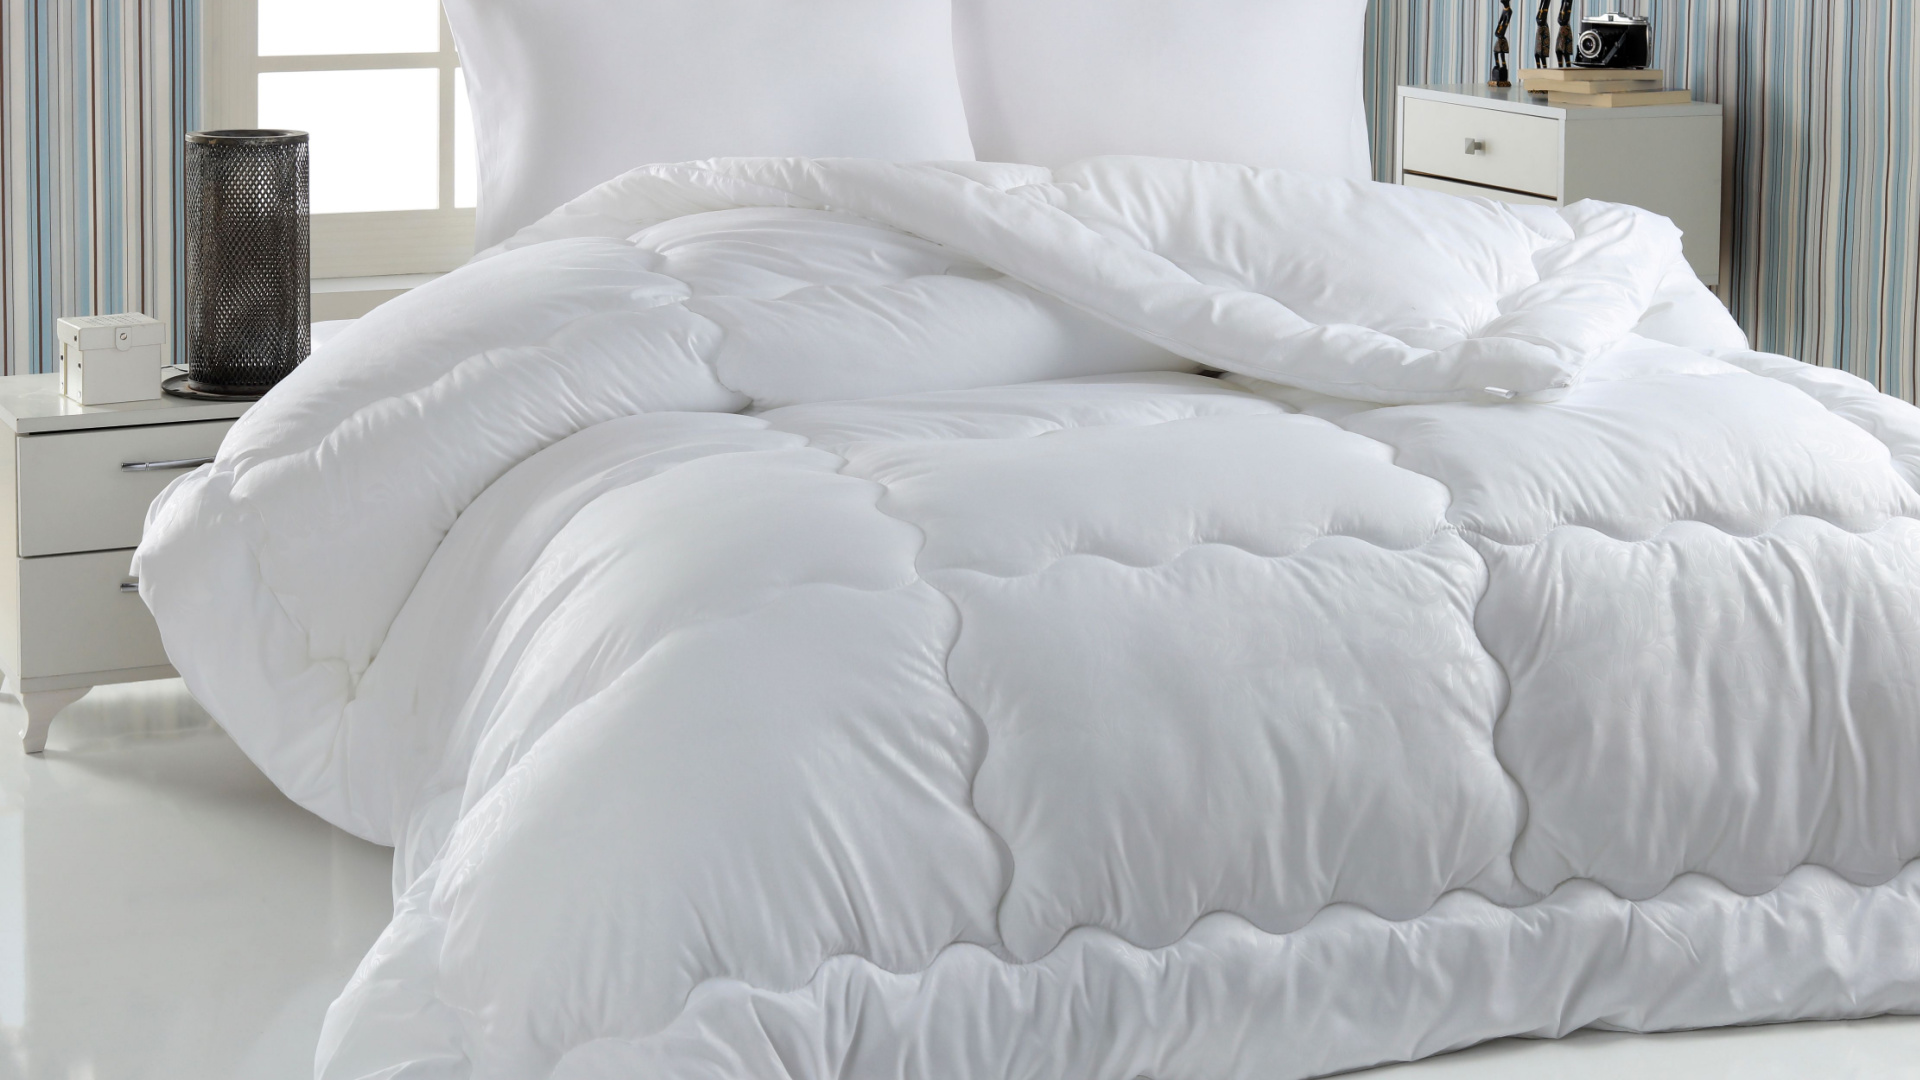 How to Wash Down Bedding